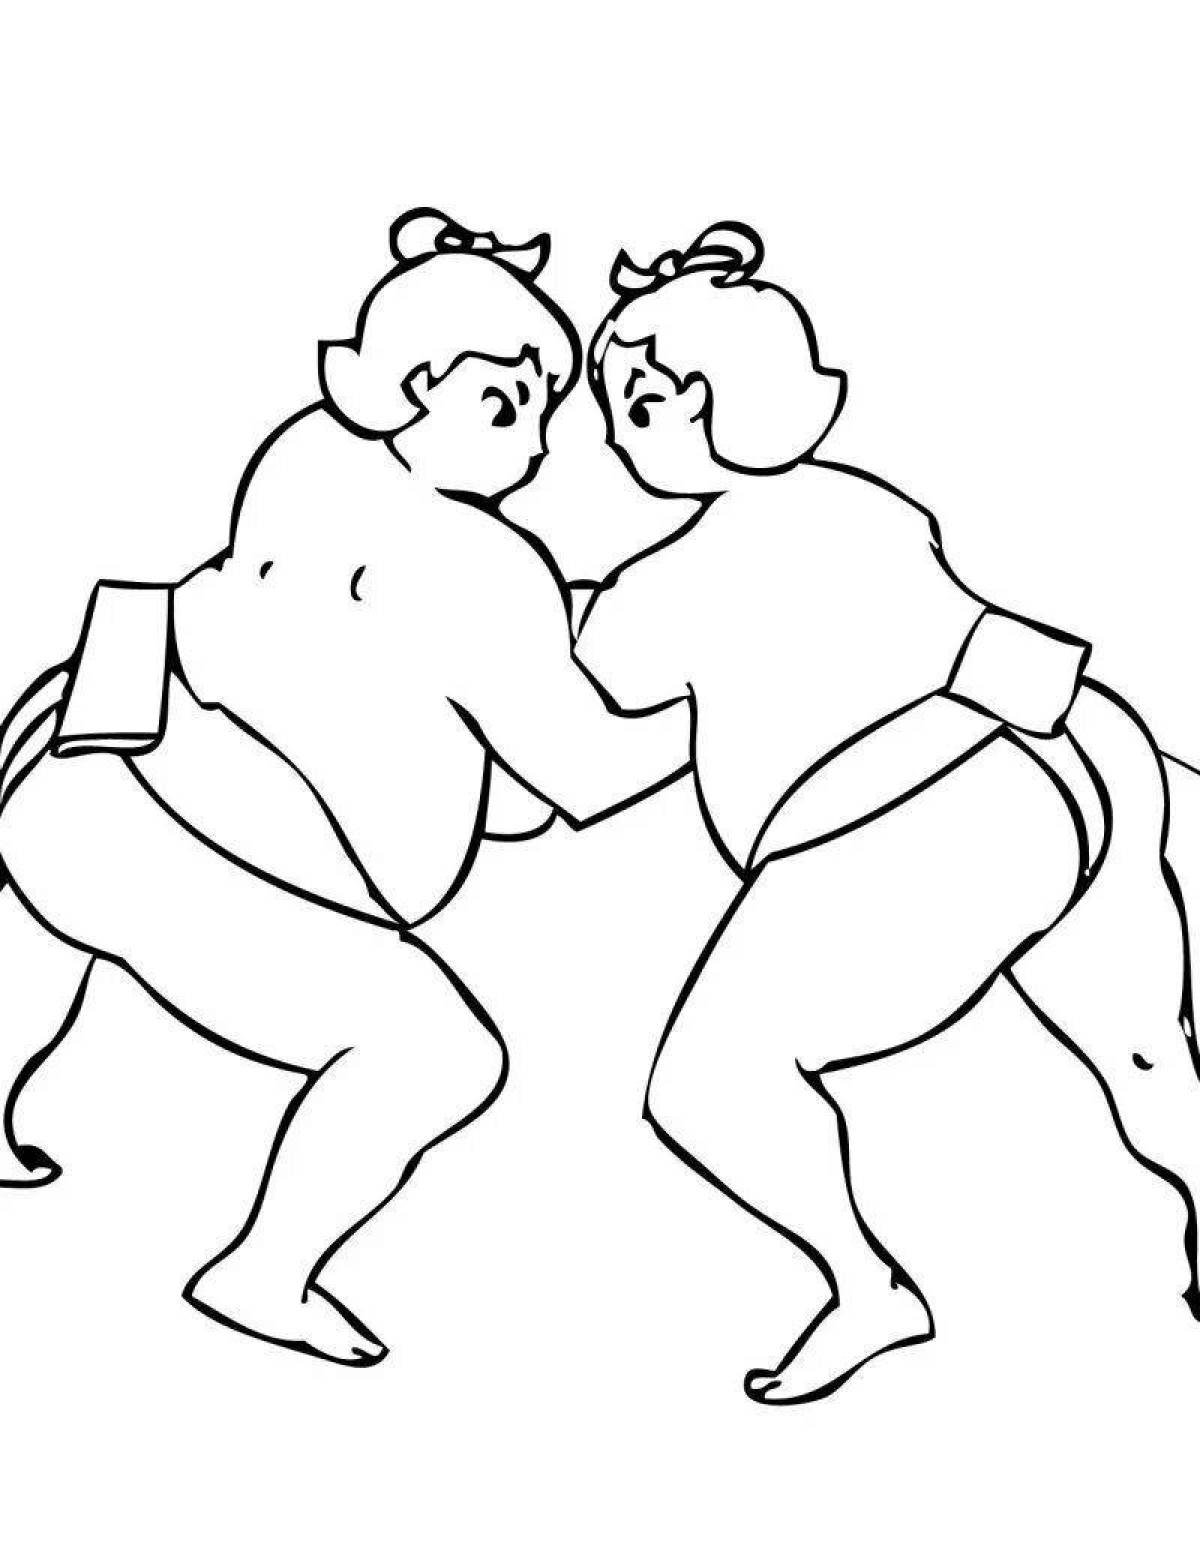 Majestic wrestler coloring pages